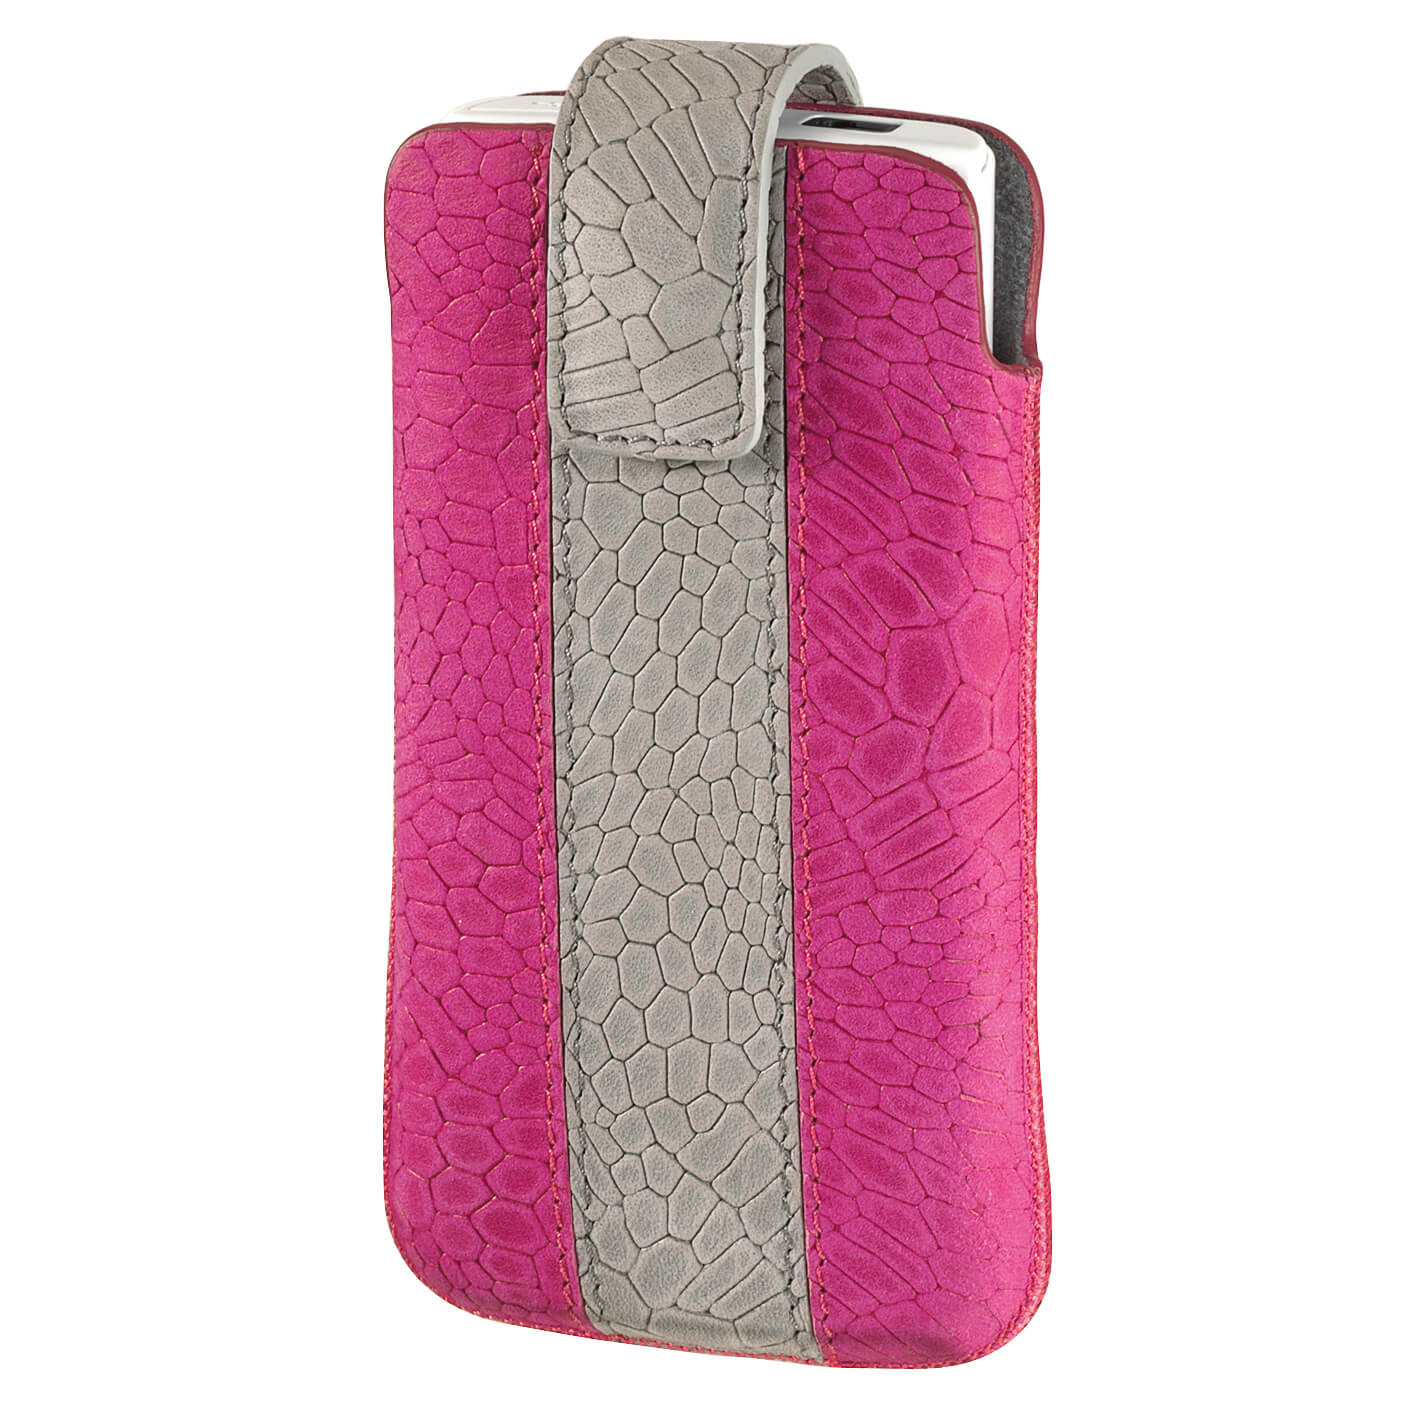 Chic Case Mobile Phone Sleeve , size M, pink/grey